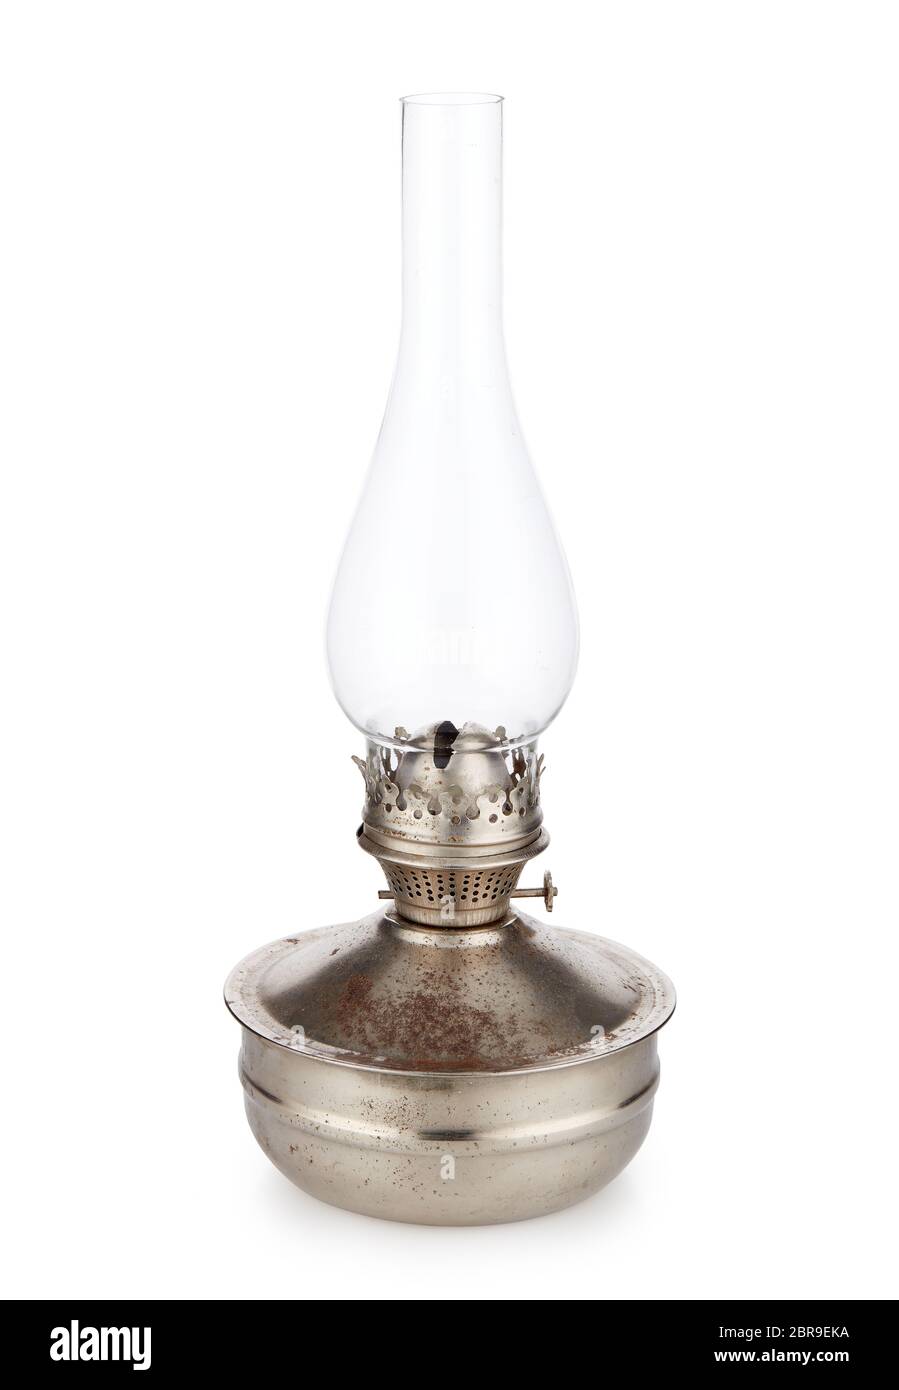 Oil lamp wick lantern made of glass and metal isolated on white